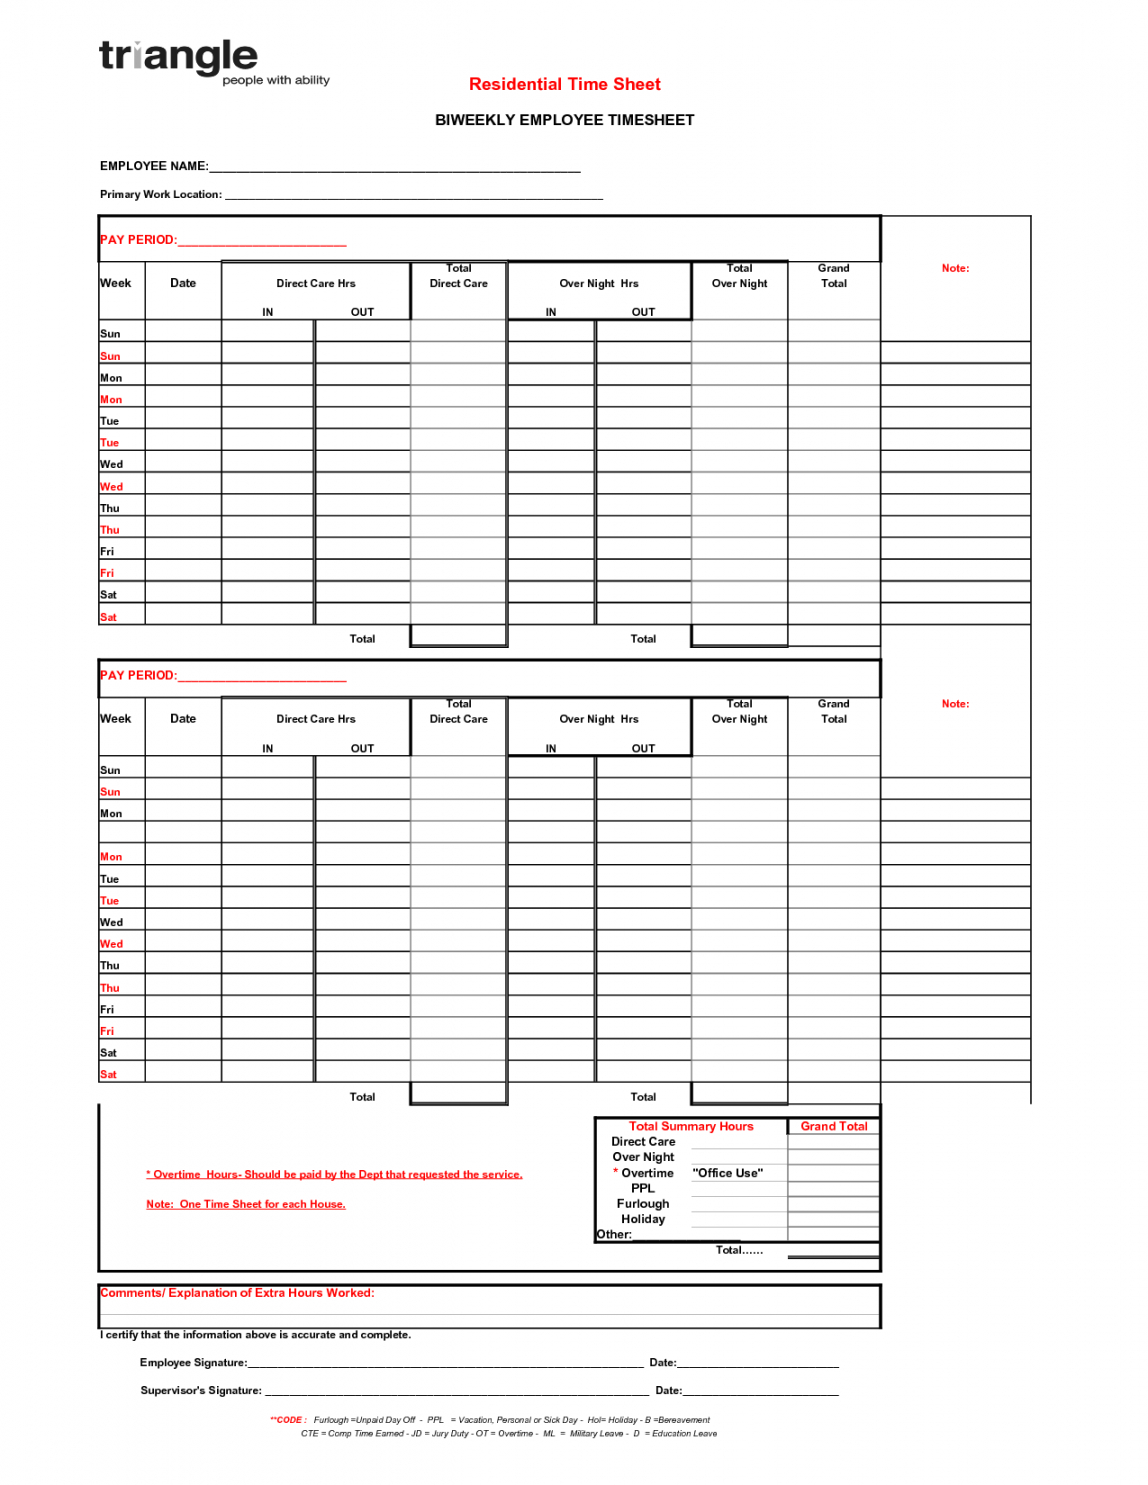 15 best images of basic budget worksheet excel actual and projected personal budget template blank